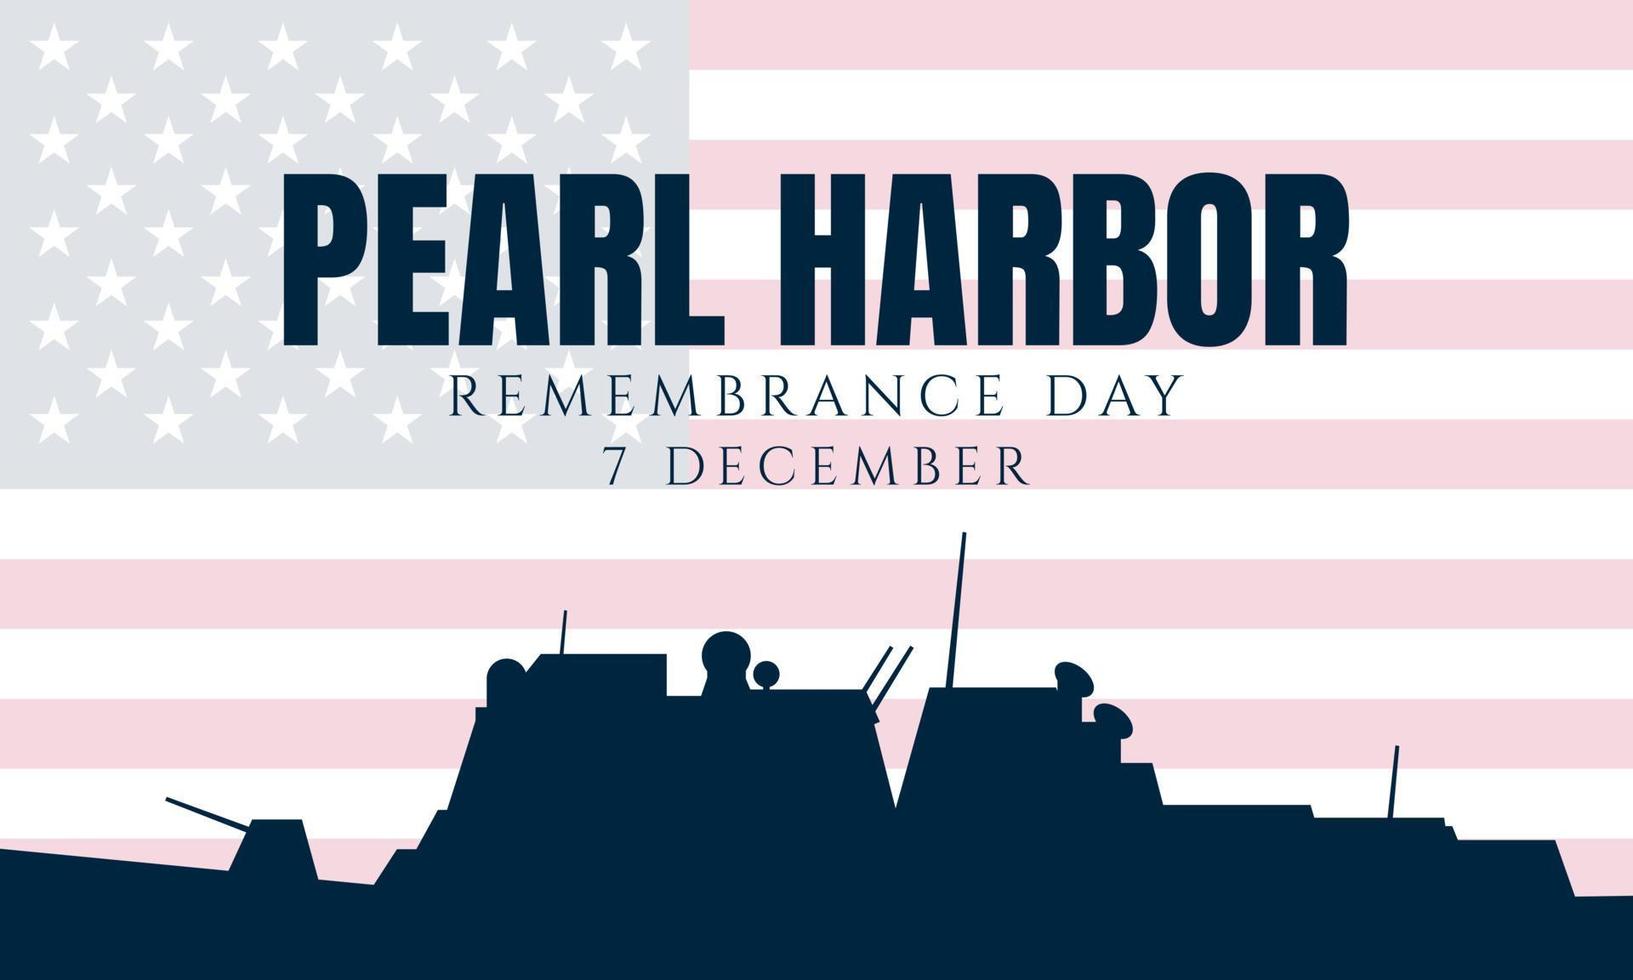 Pearl Harbor Remembrance Day Background Design. vector